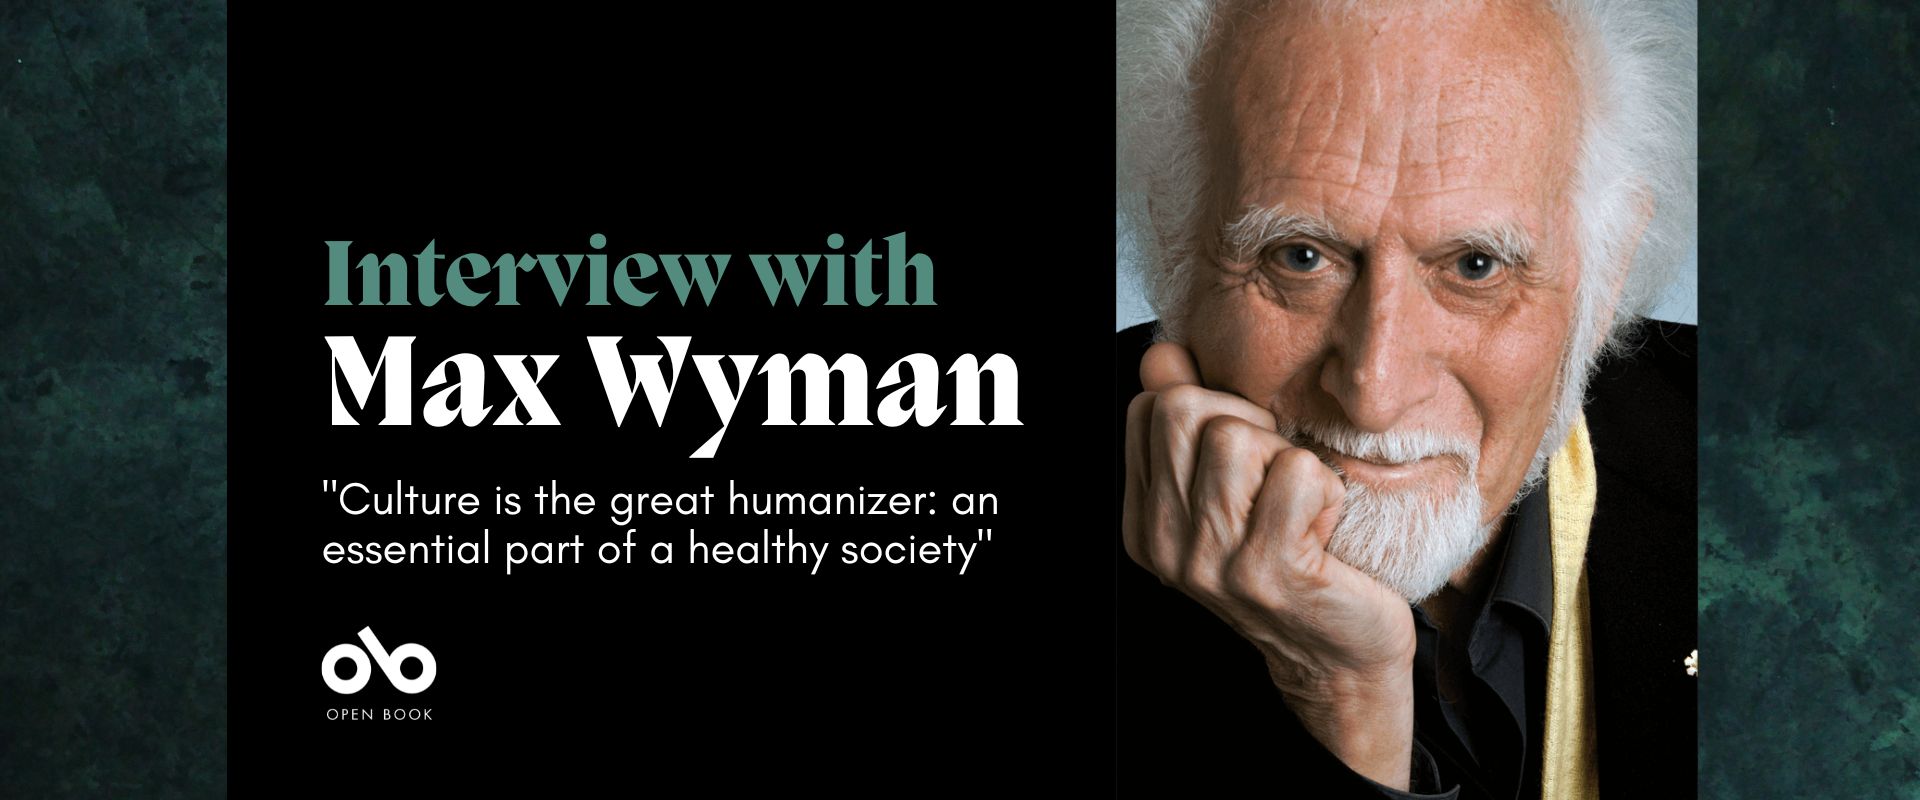 black and green banner image with a photo of writer Max Wyman and the quote Culture is the great humanizer: an essential part of a healthy society. Open Book logo bottom left.